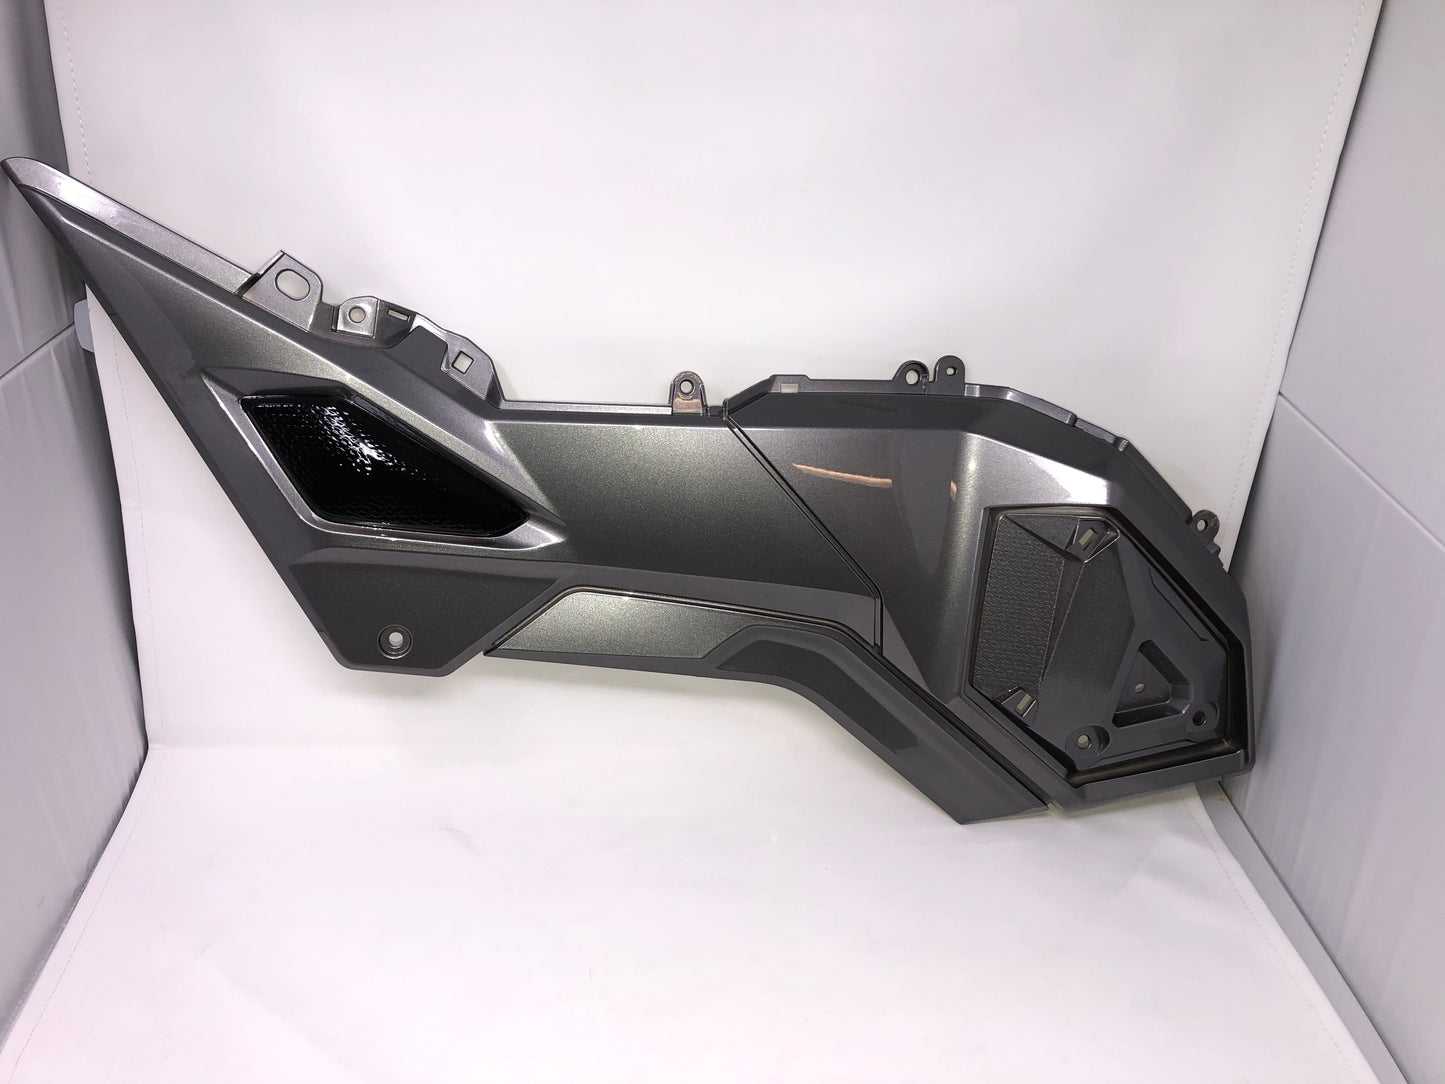 Right Middle Side Fairing for BD125-10 | Vader 125cc Gen II Middle Right Panel